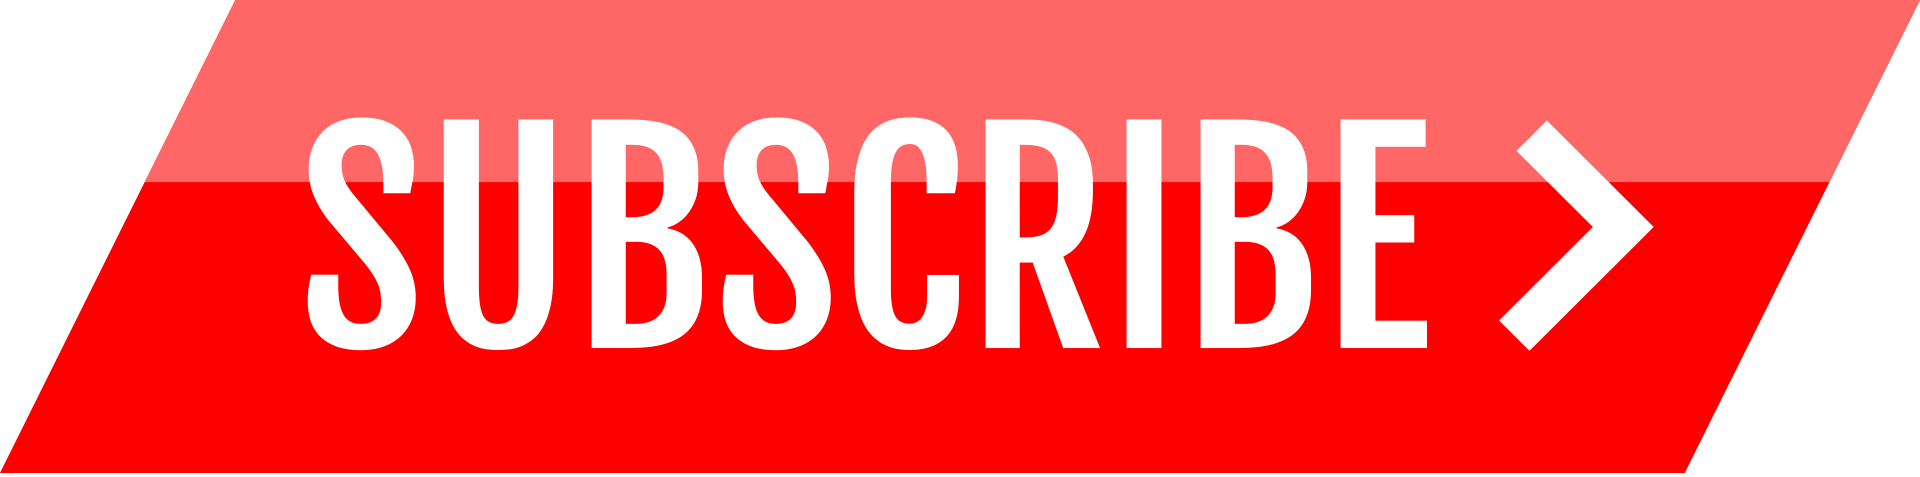 YouTube subscribe button PNG Image